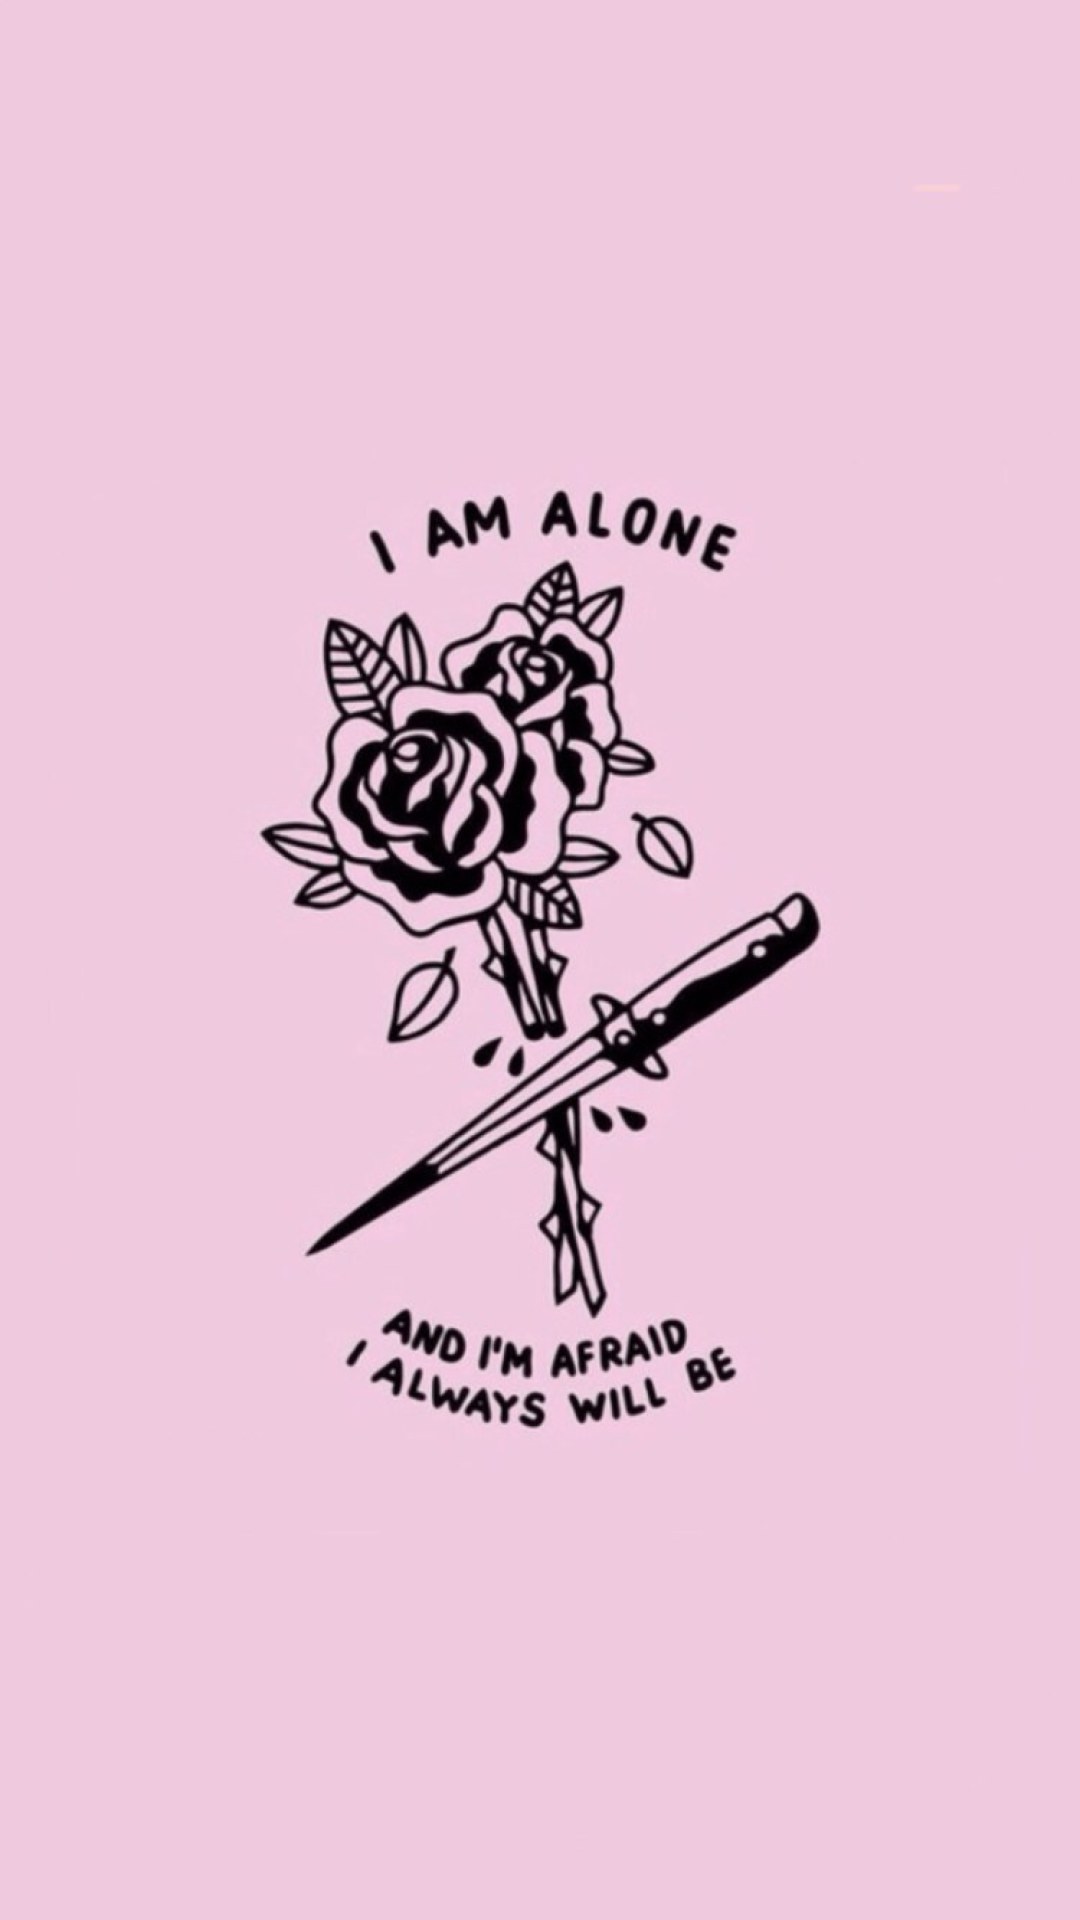 Sad Aesthetic Wallpaper, I Am Alone • Wallpaper For You